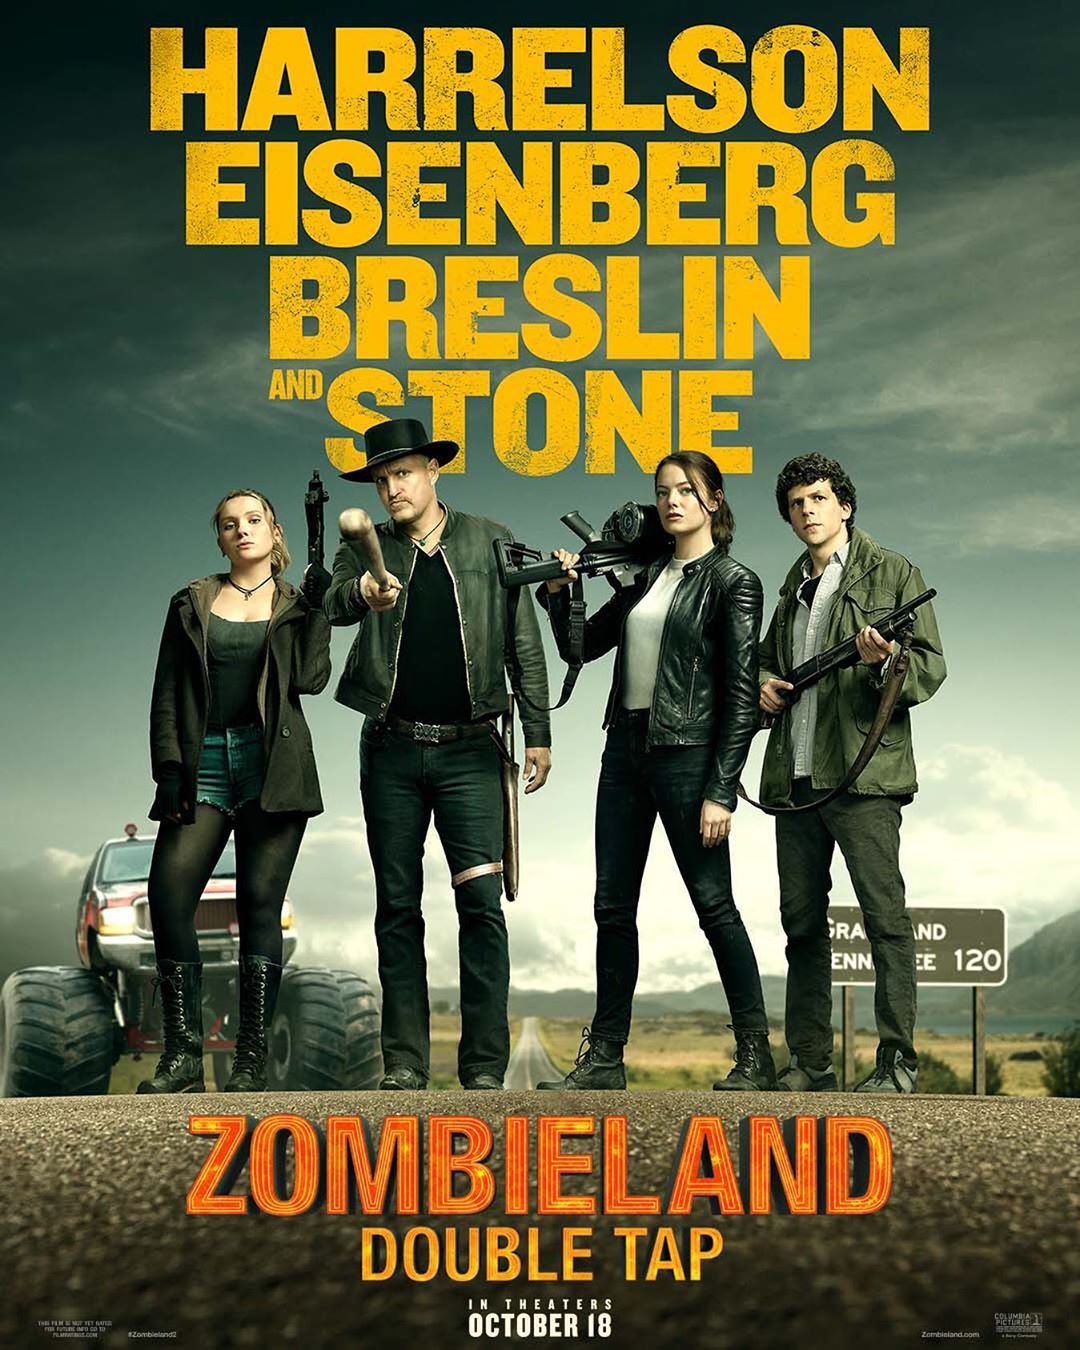 Zombieland: Double Tap Review: Woody Harrelson and Jesse Eisenberg's movie is consumable only by diehard fans